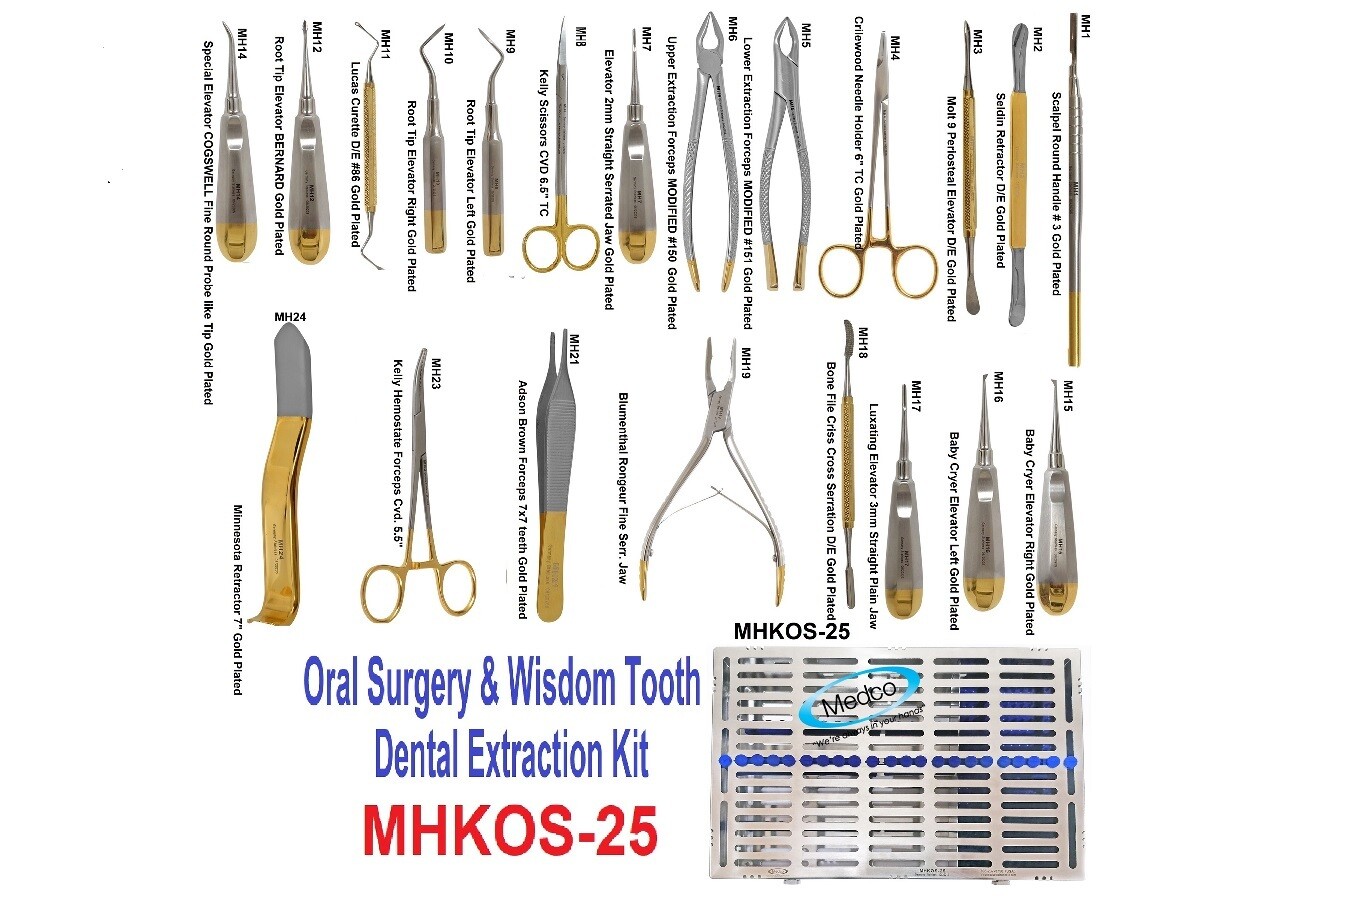 Dr. Karl Koerner Oral Surgery/Wisdom Tooth Extraction Kit